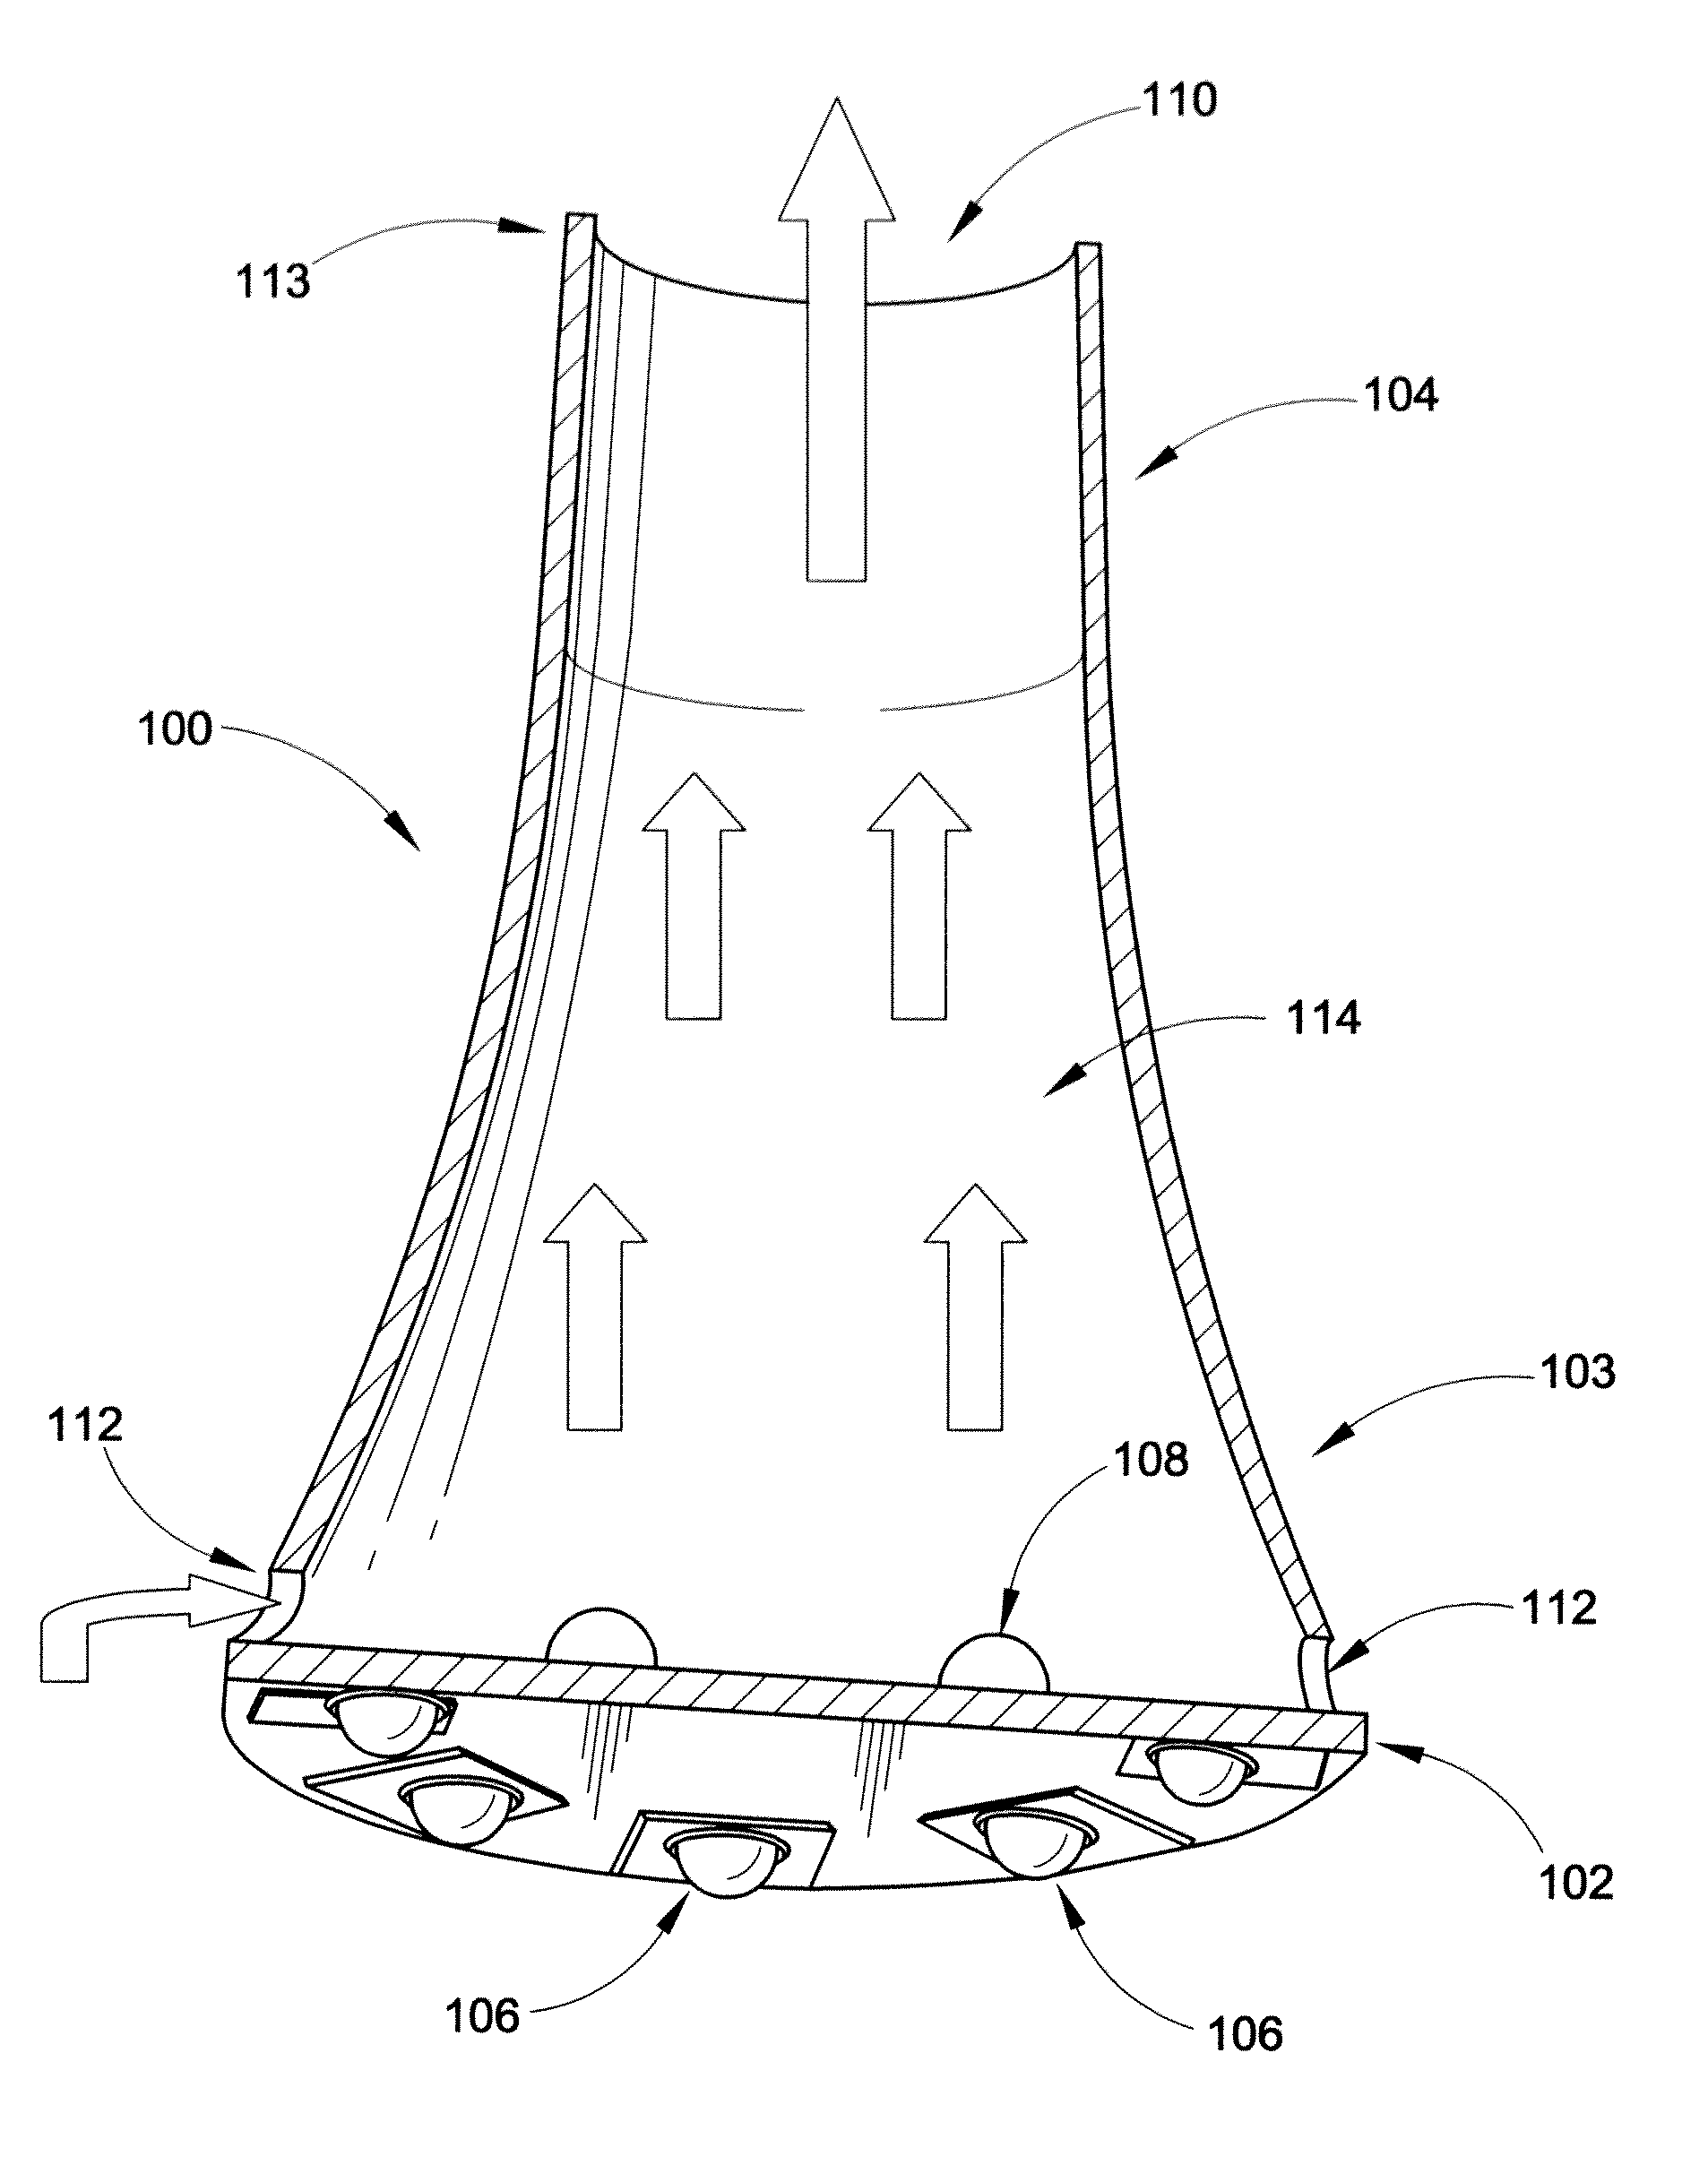 Device with combined features of lighting and air purification